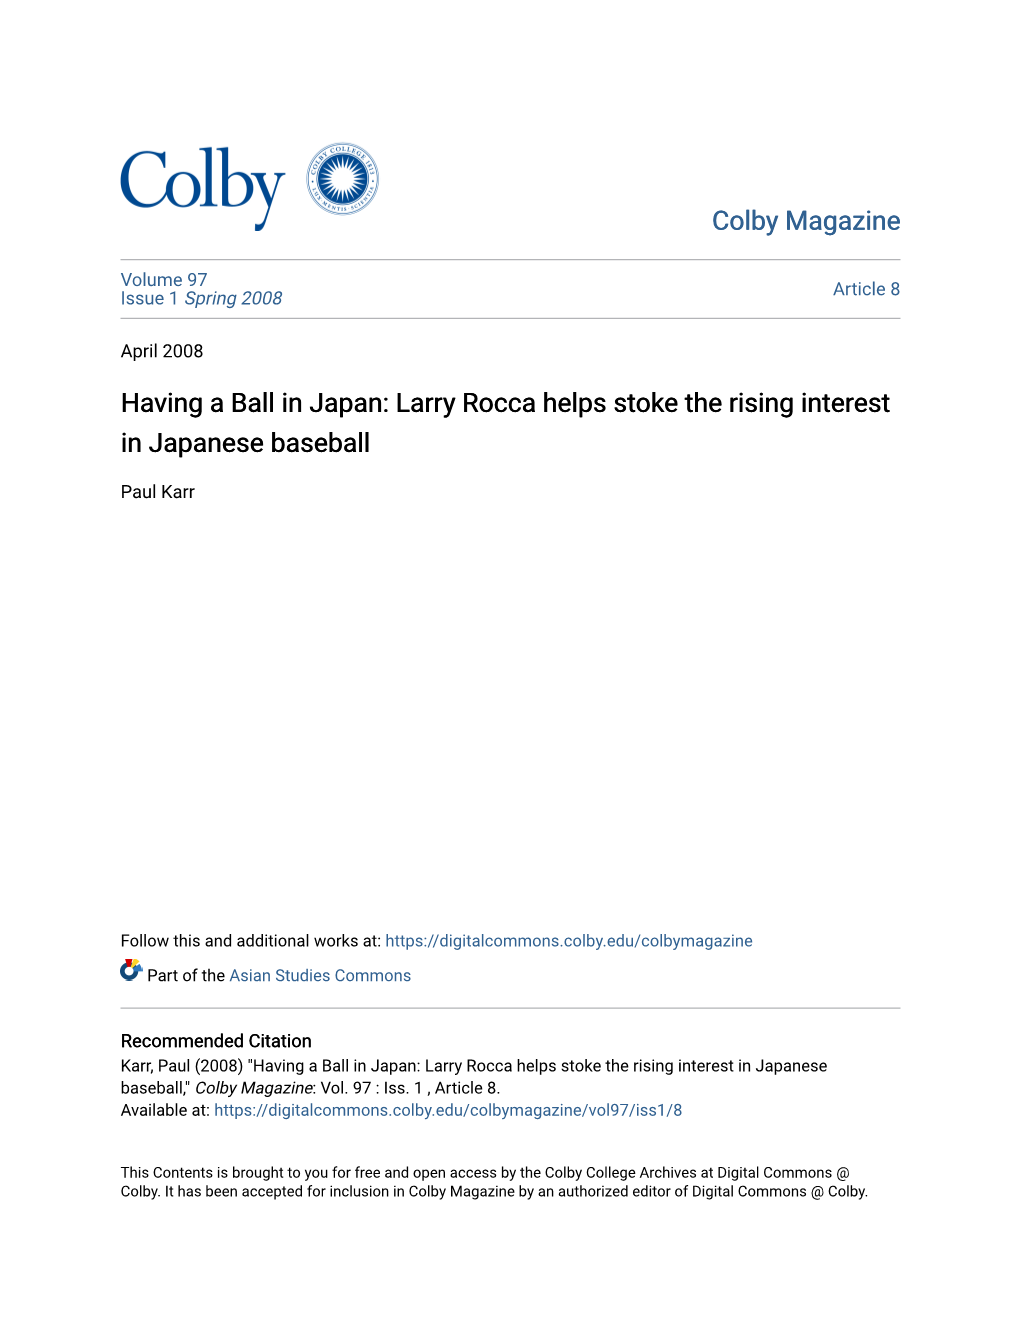 Larry Rocca Helps Stoke the Rising Interest in Japanese Baseball